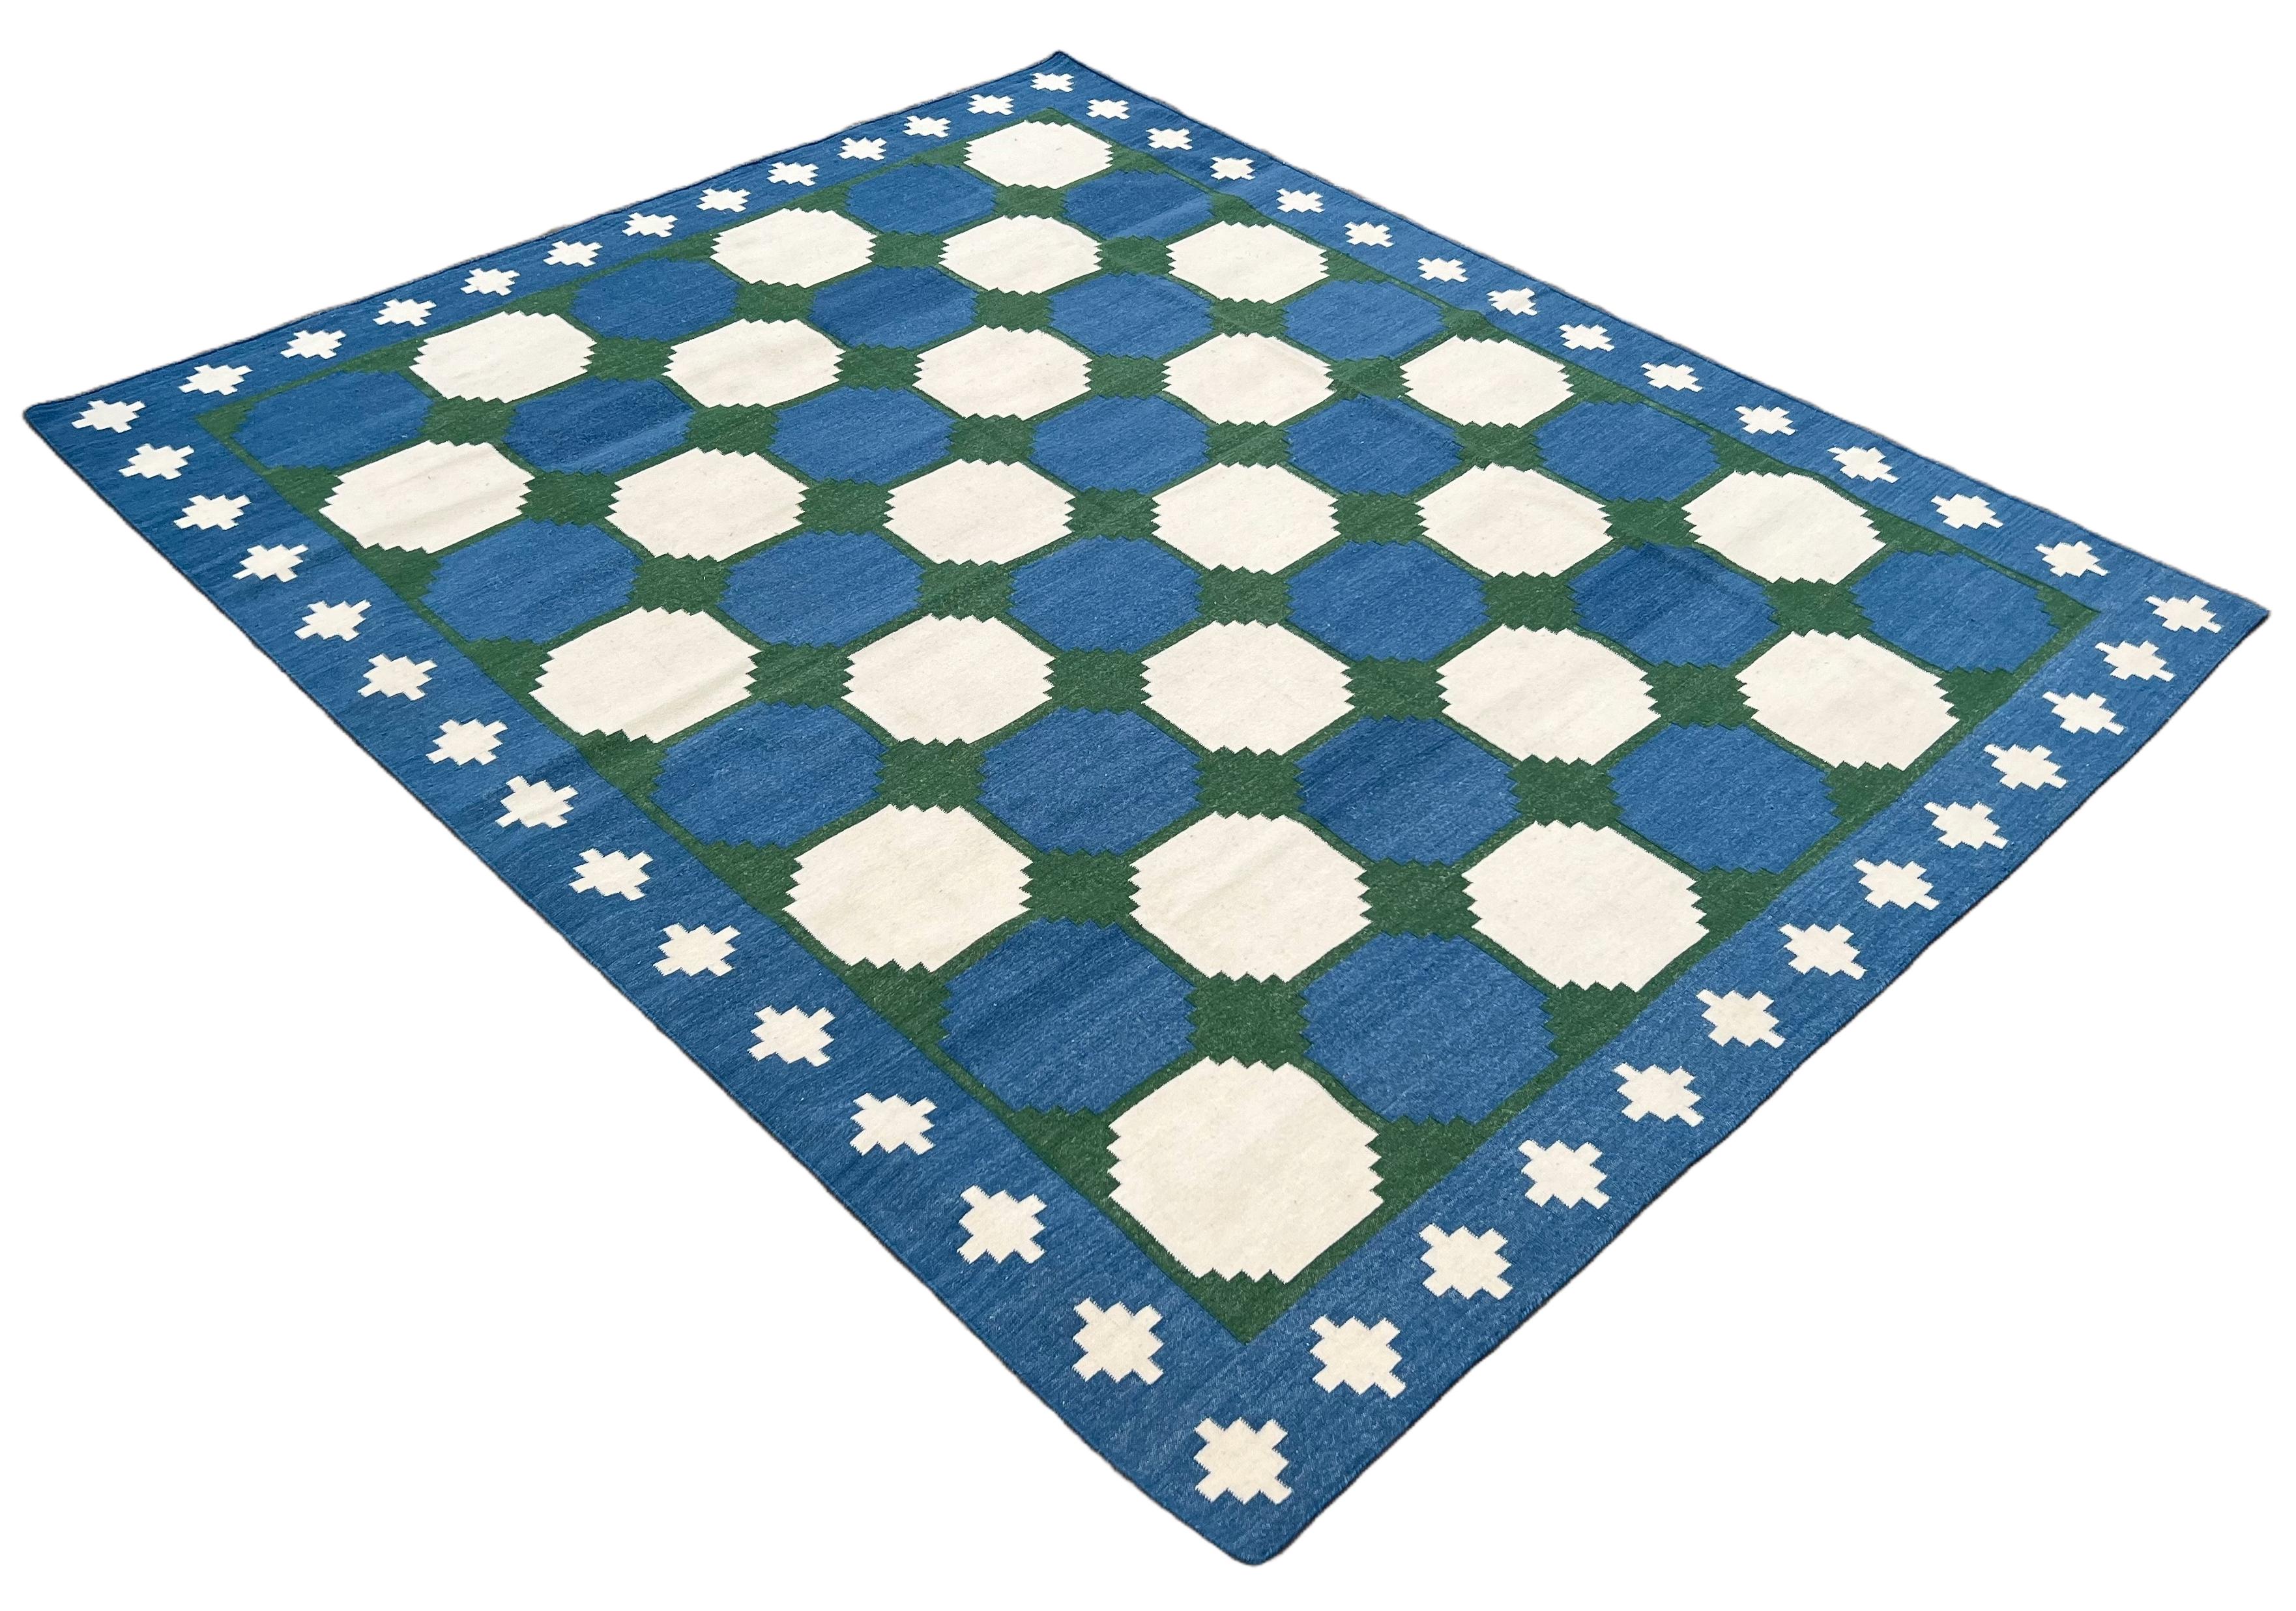 Mid-Century Modern Handmade Woolen Area Flat Weave Rug, 8x10 Blue And Green Tile Patterned Dhurrie For Sale